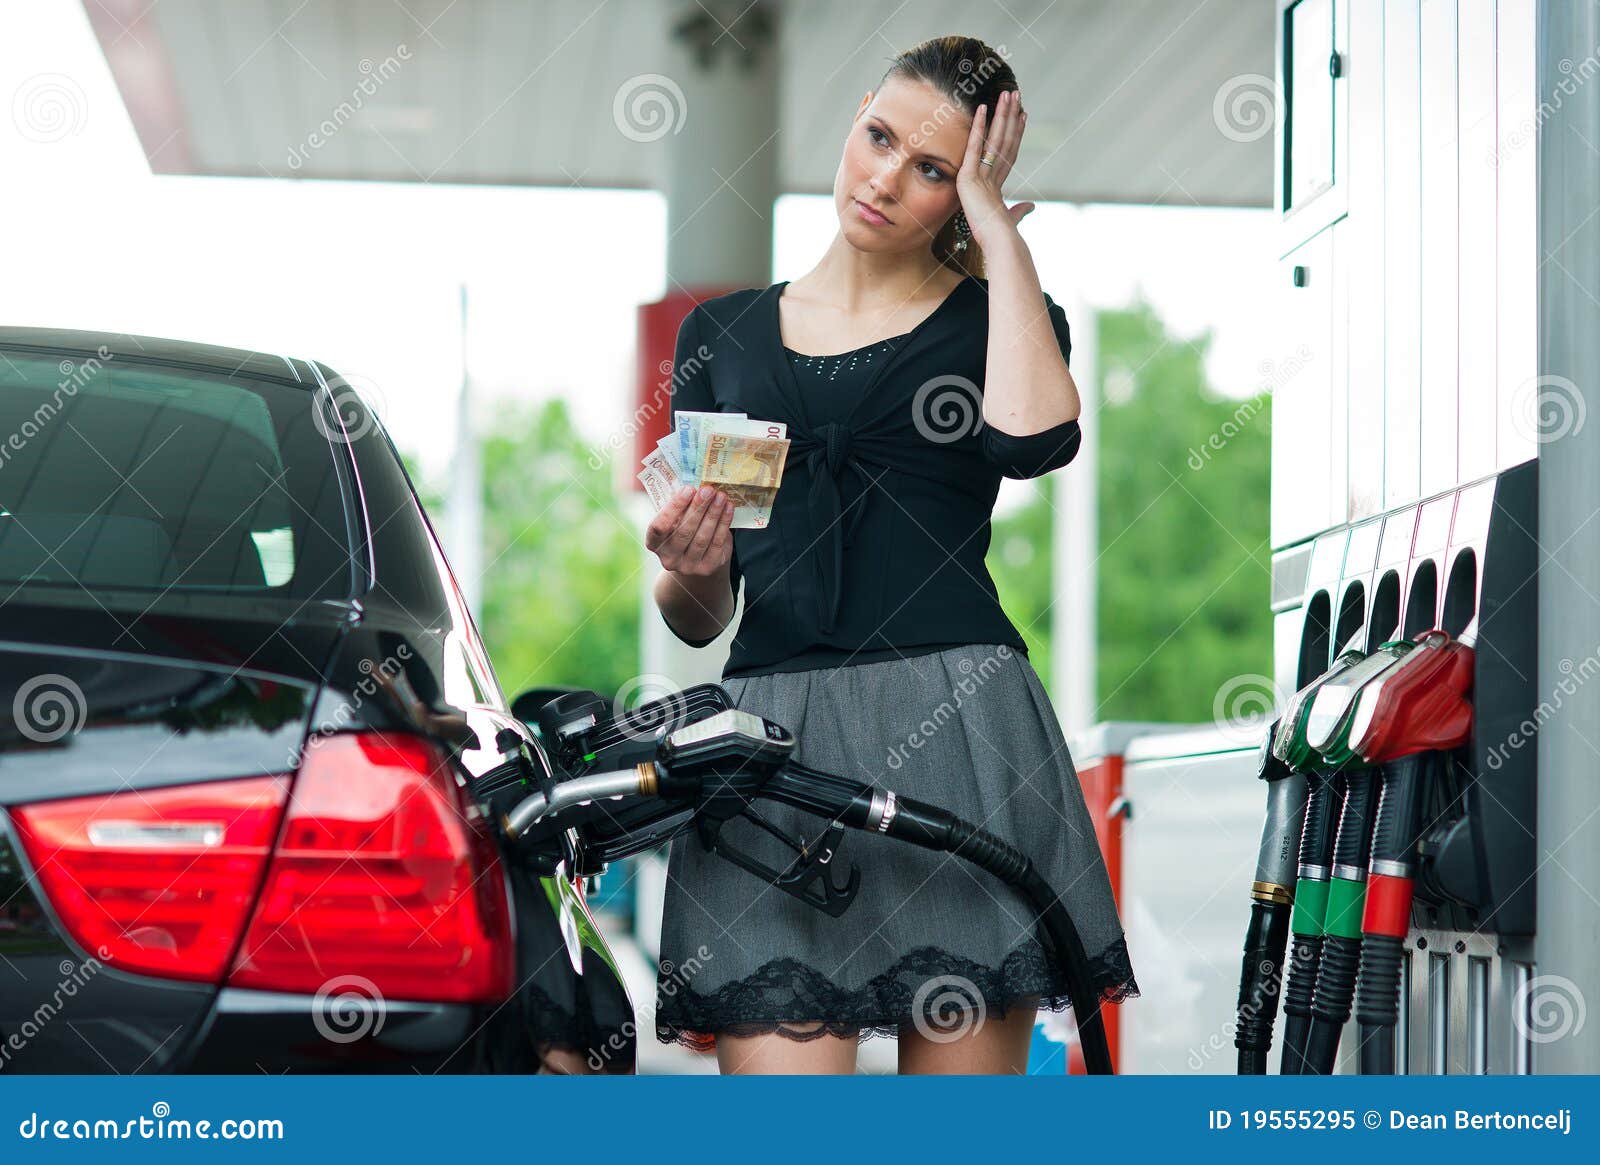 woman counting money on gas station